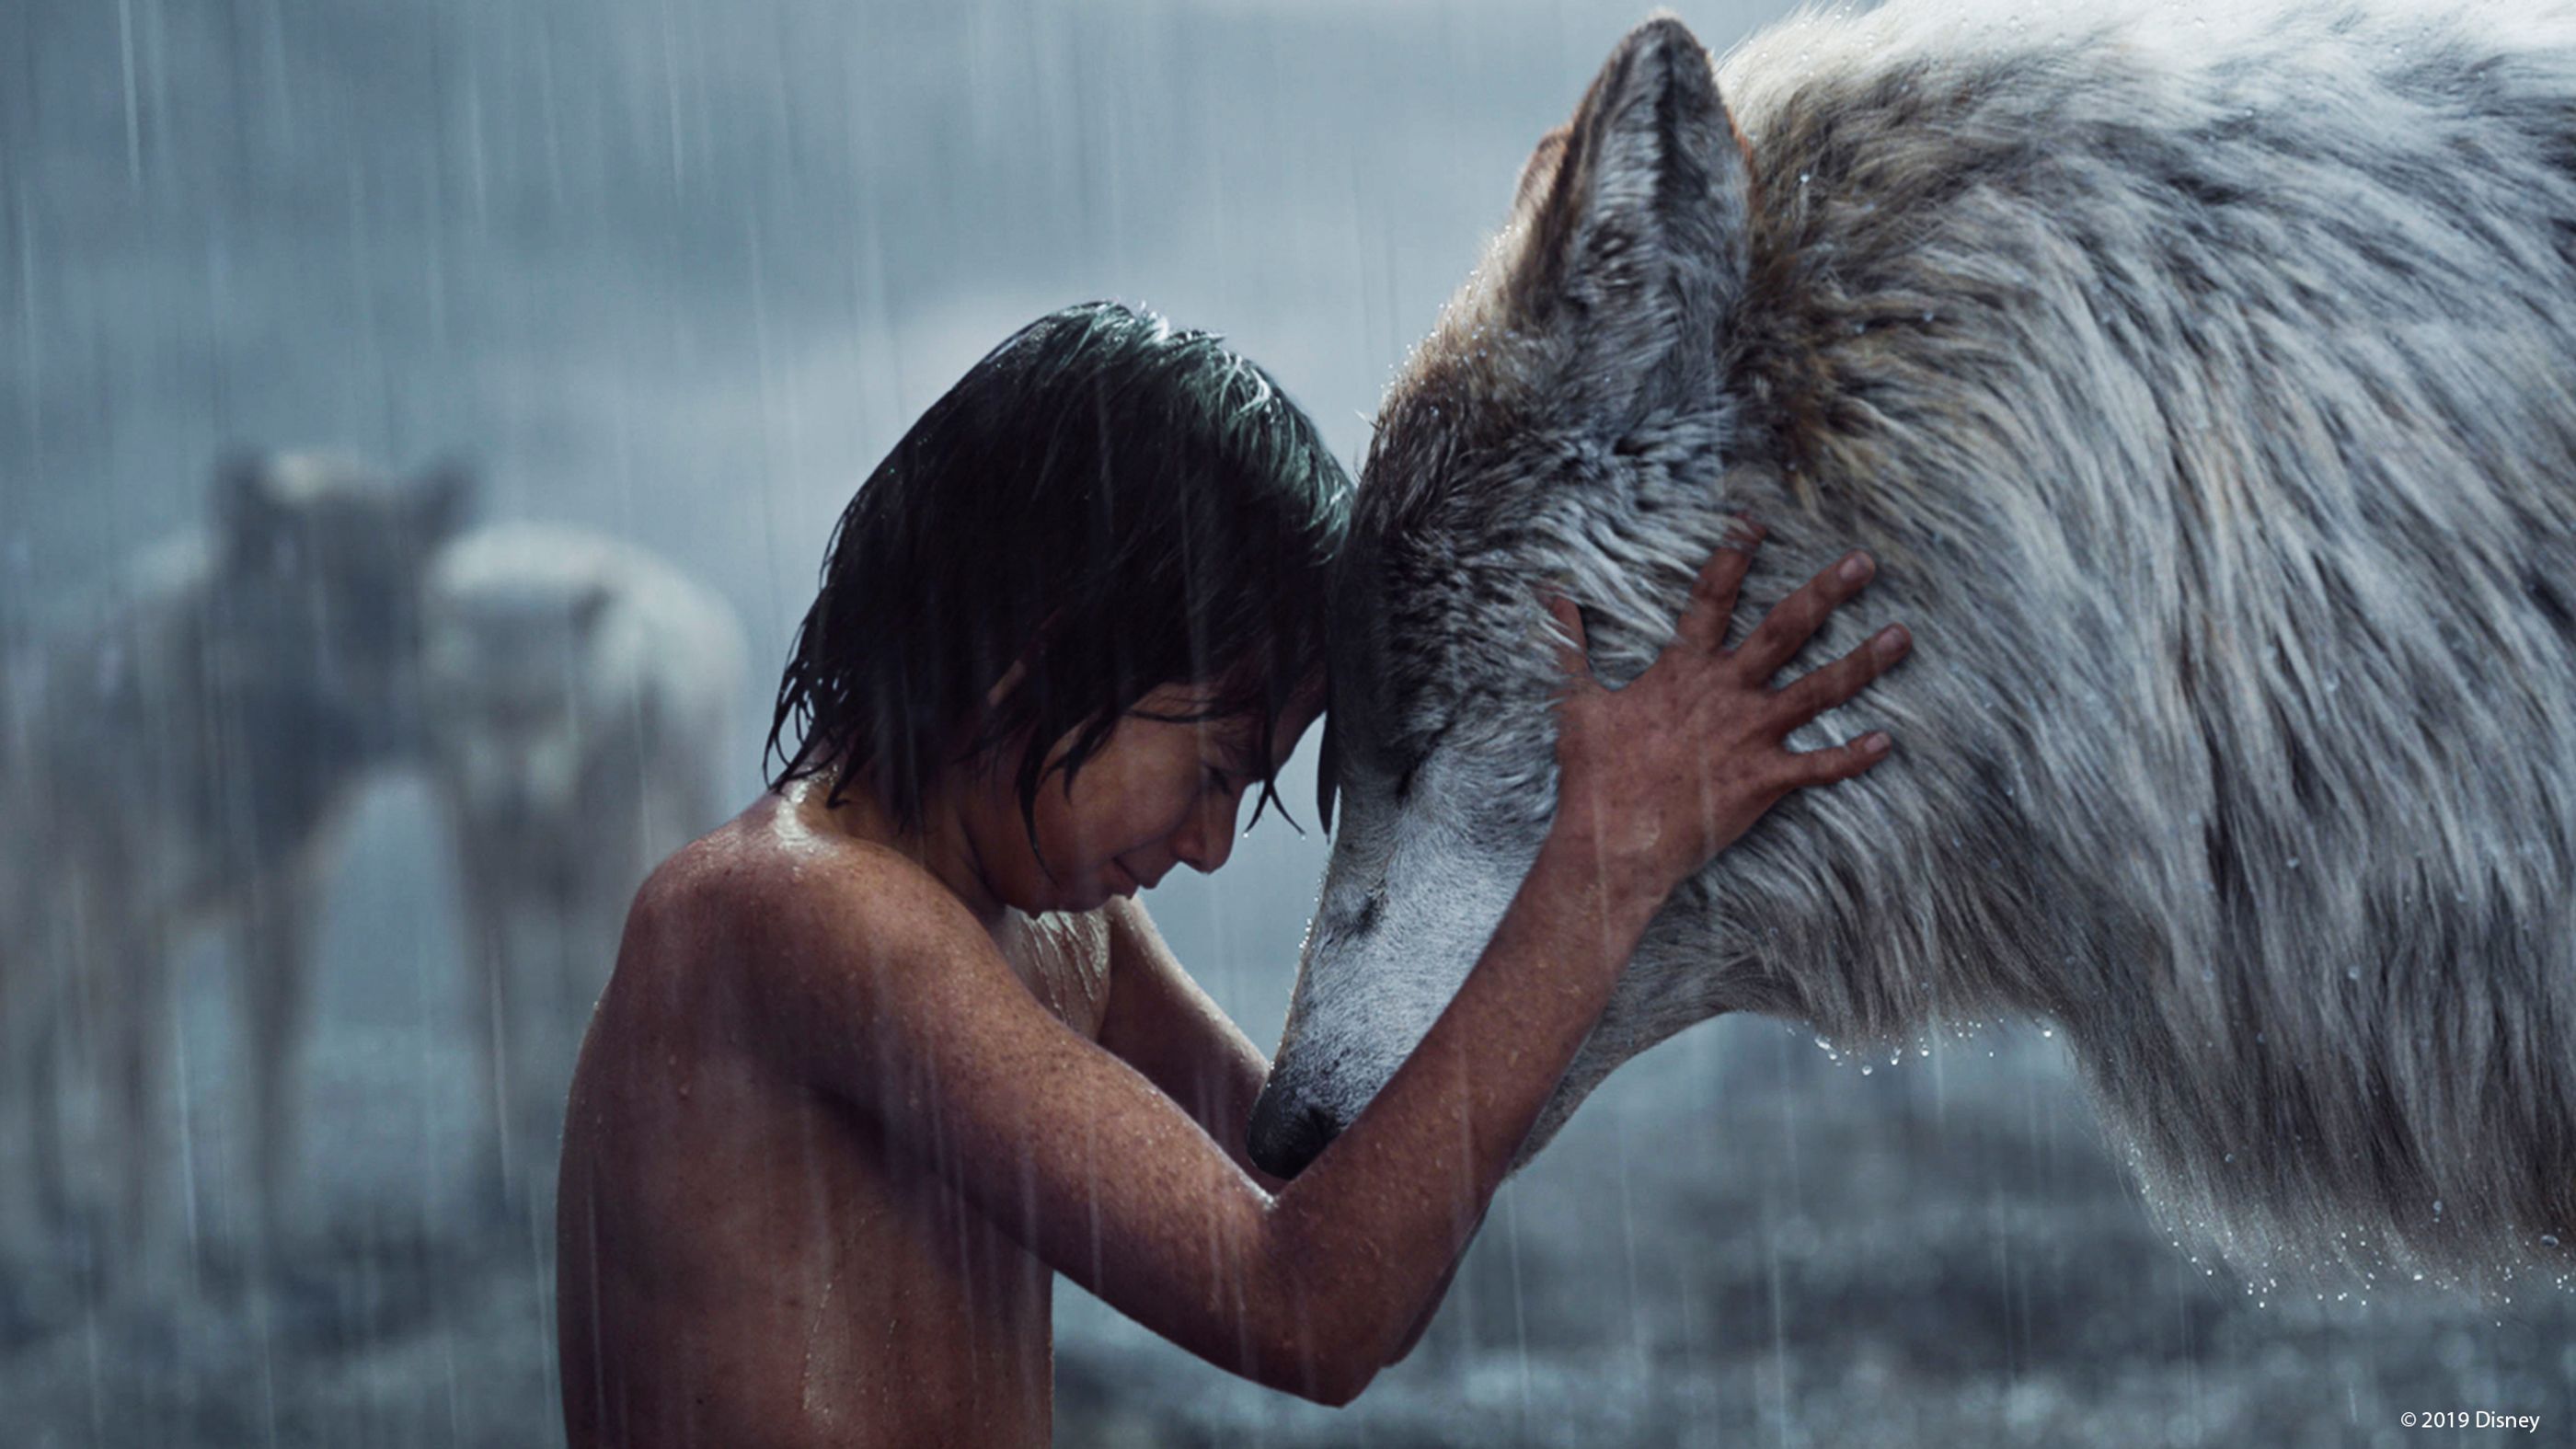 The Jungle Book | Movies Anywhere